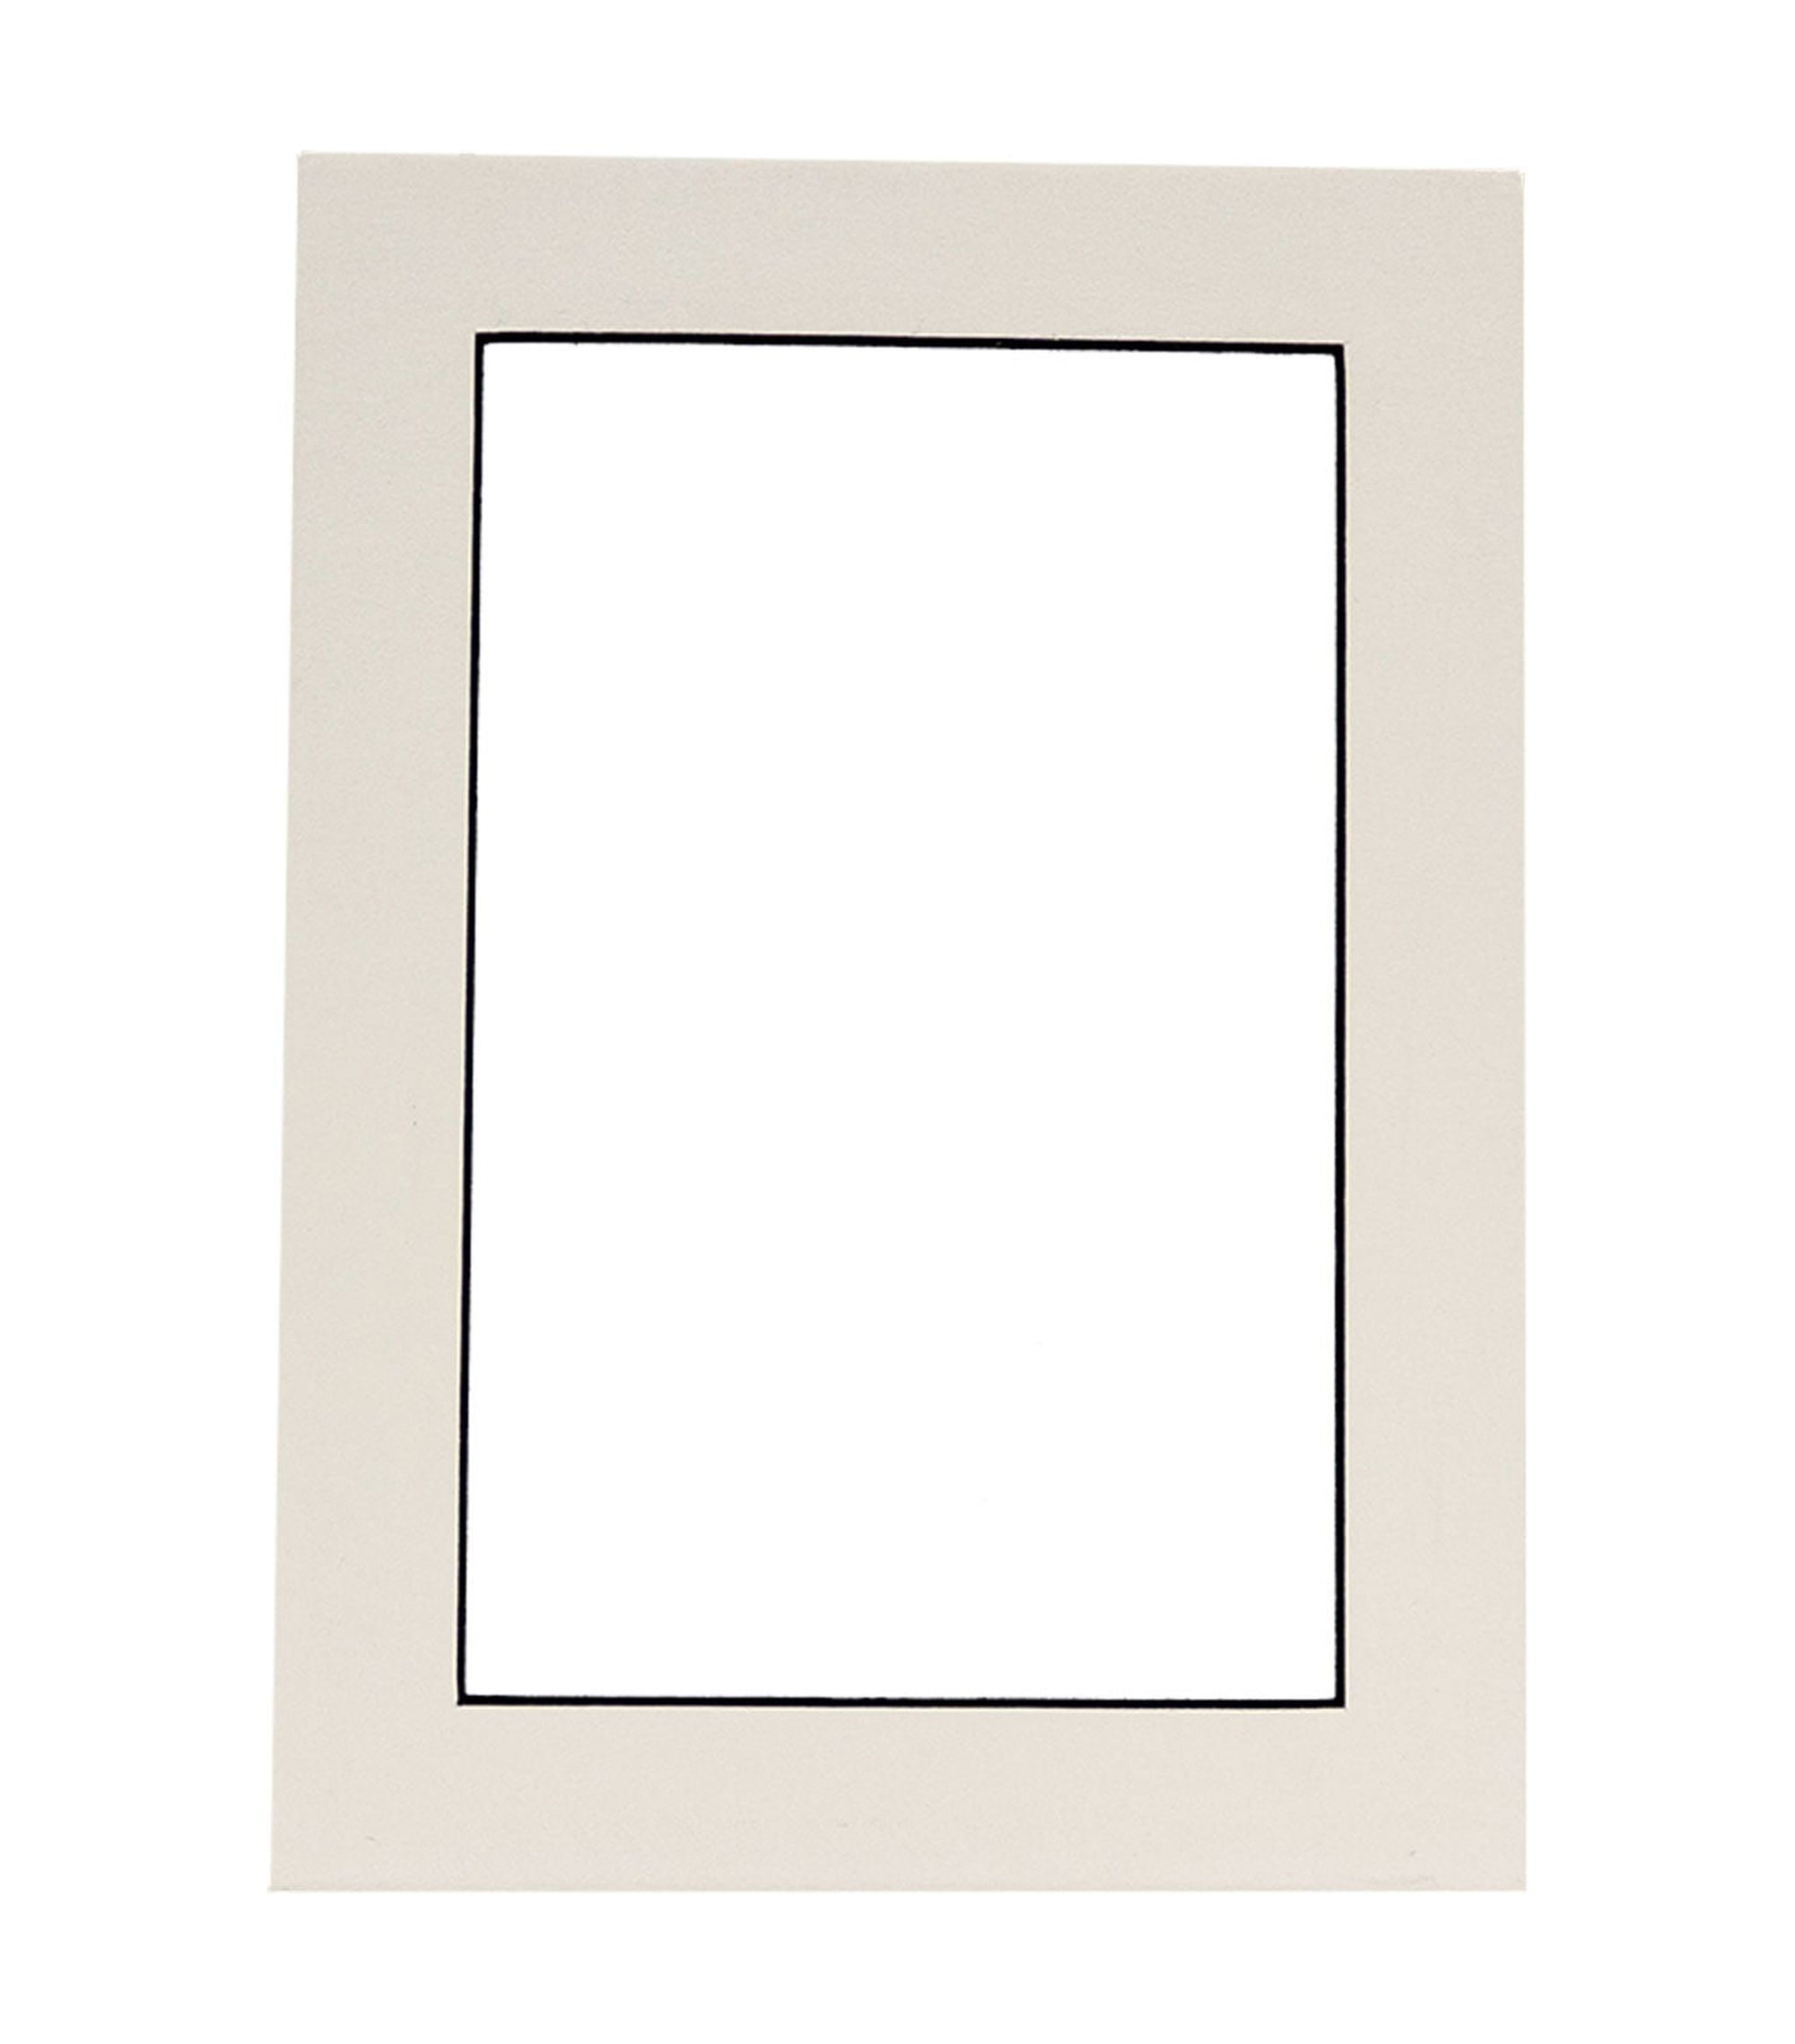 White Photo Mat with Black Core 16x20 for 8x10 Photos - Fits 16x20 Frame 